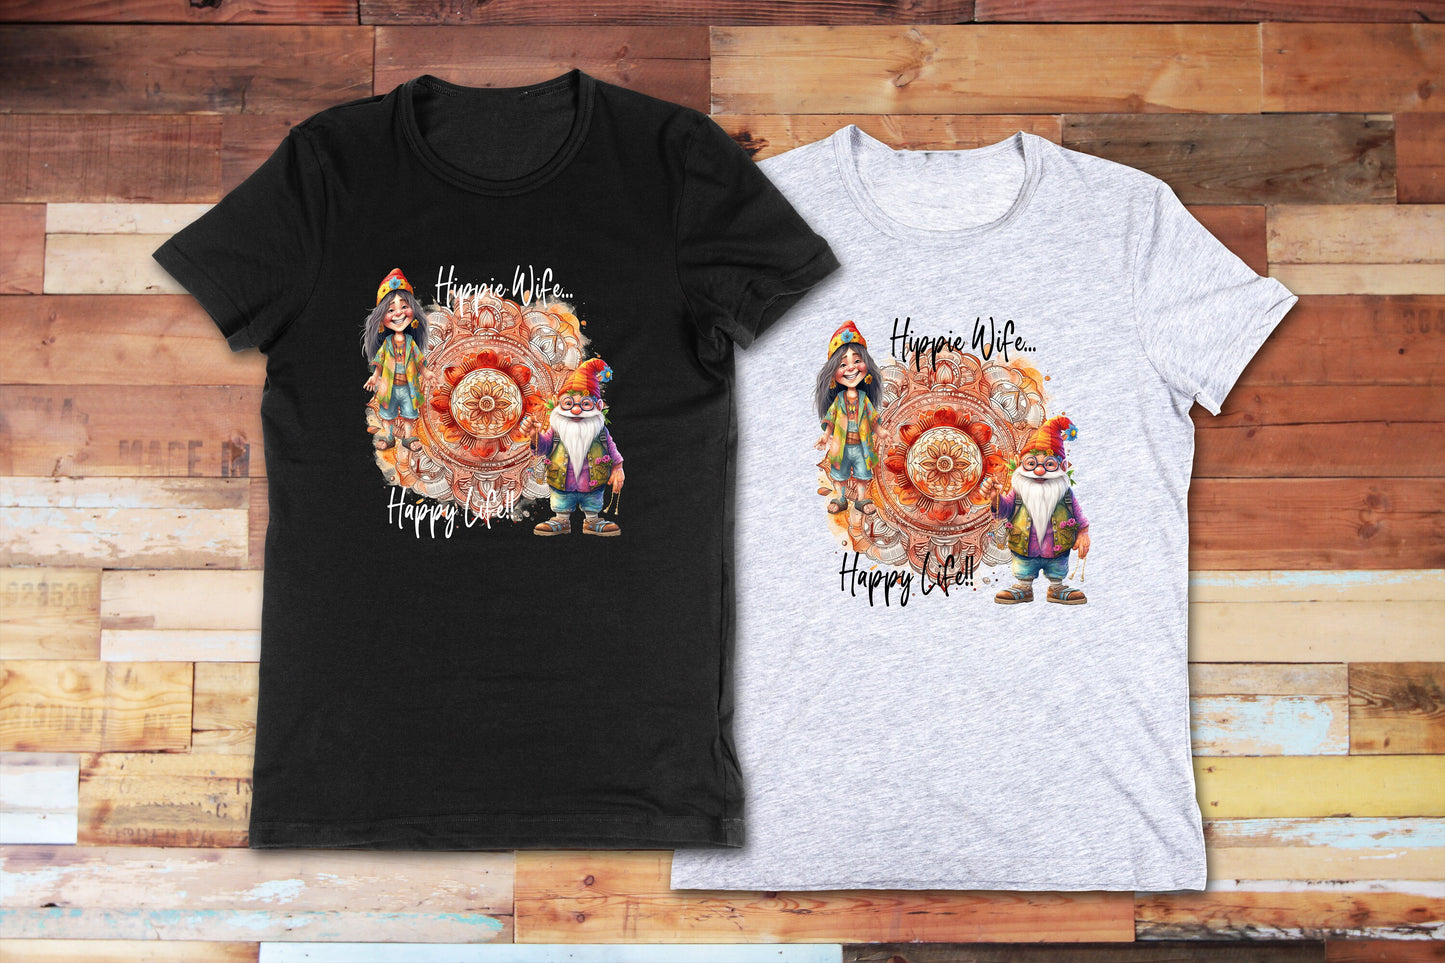 Hippie Wife Happy Life T Shirt, Tshirt, Graphic T's  100% Cotton Black White or Gray, Tee, Motivational,